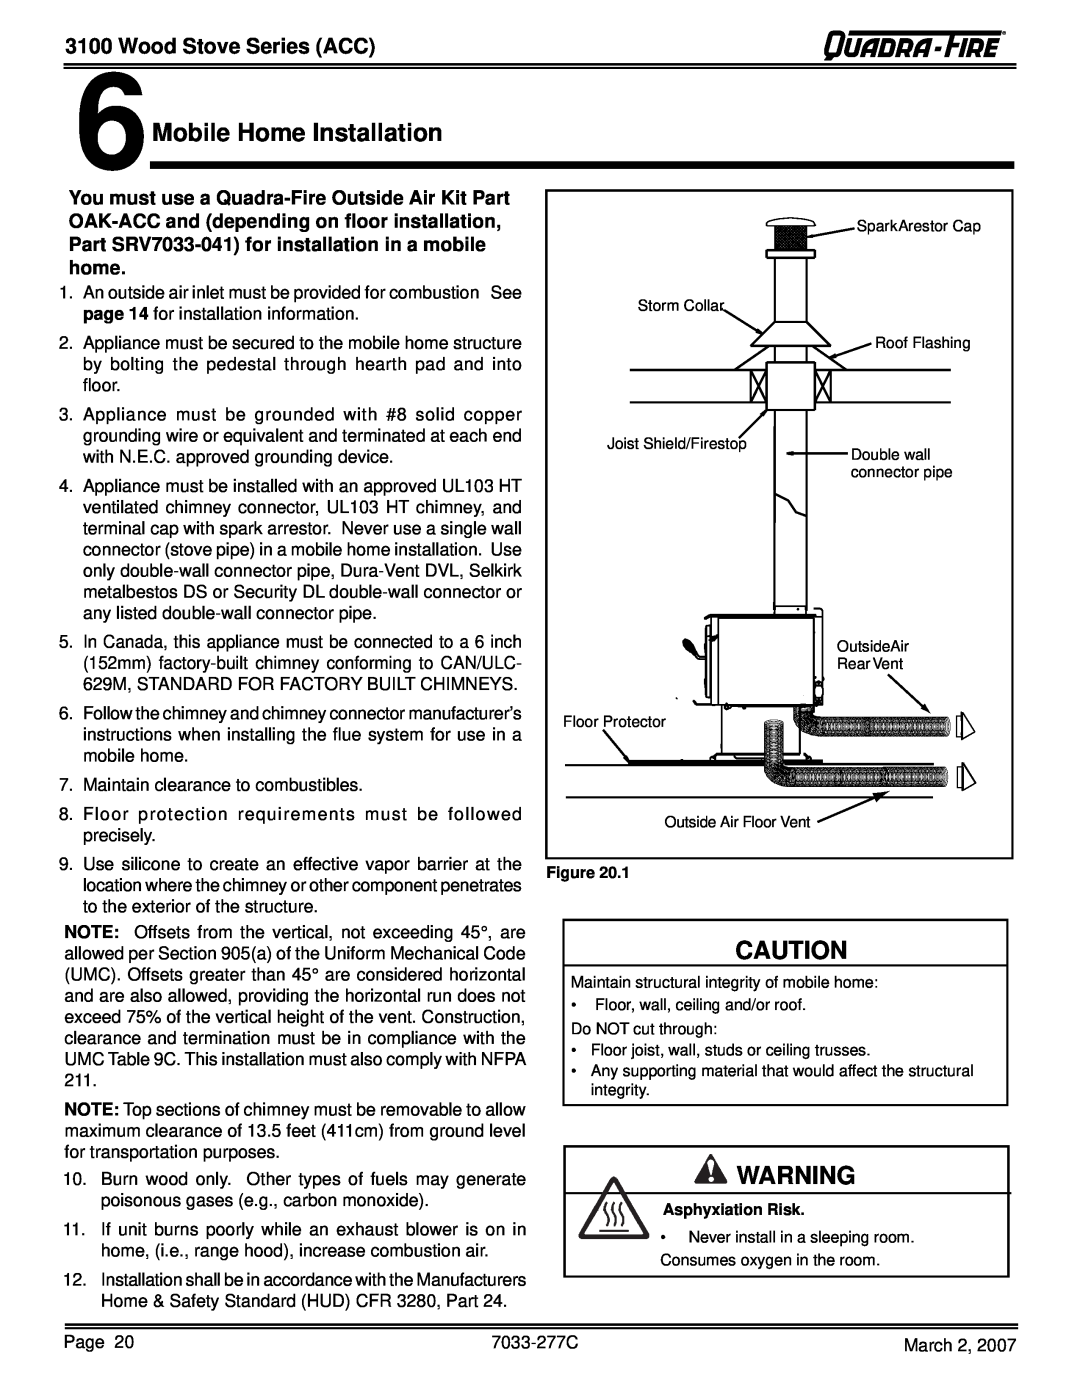 Quadra-Fire 31ST-ACC Mobile Home Installation, Wood Stove Series ACC, must use a Quadra-FireOutside Air Kit Part, You6 